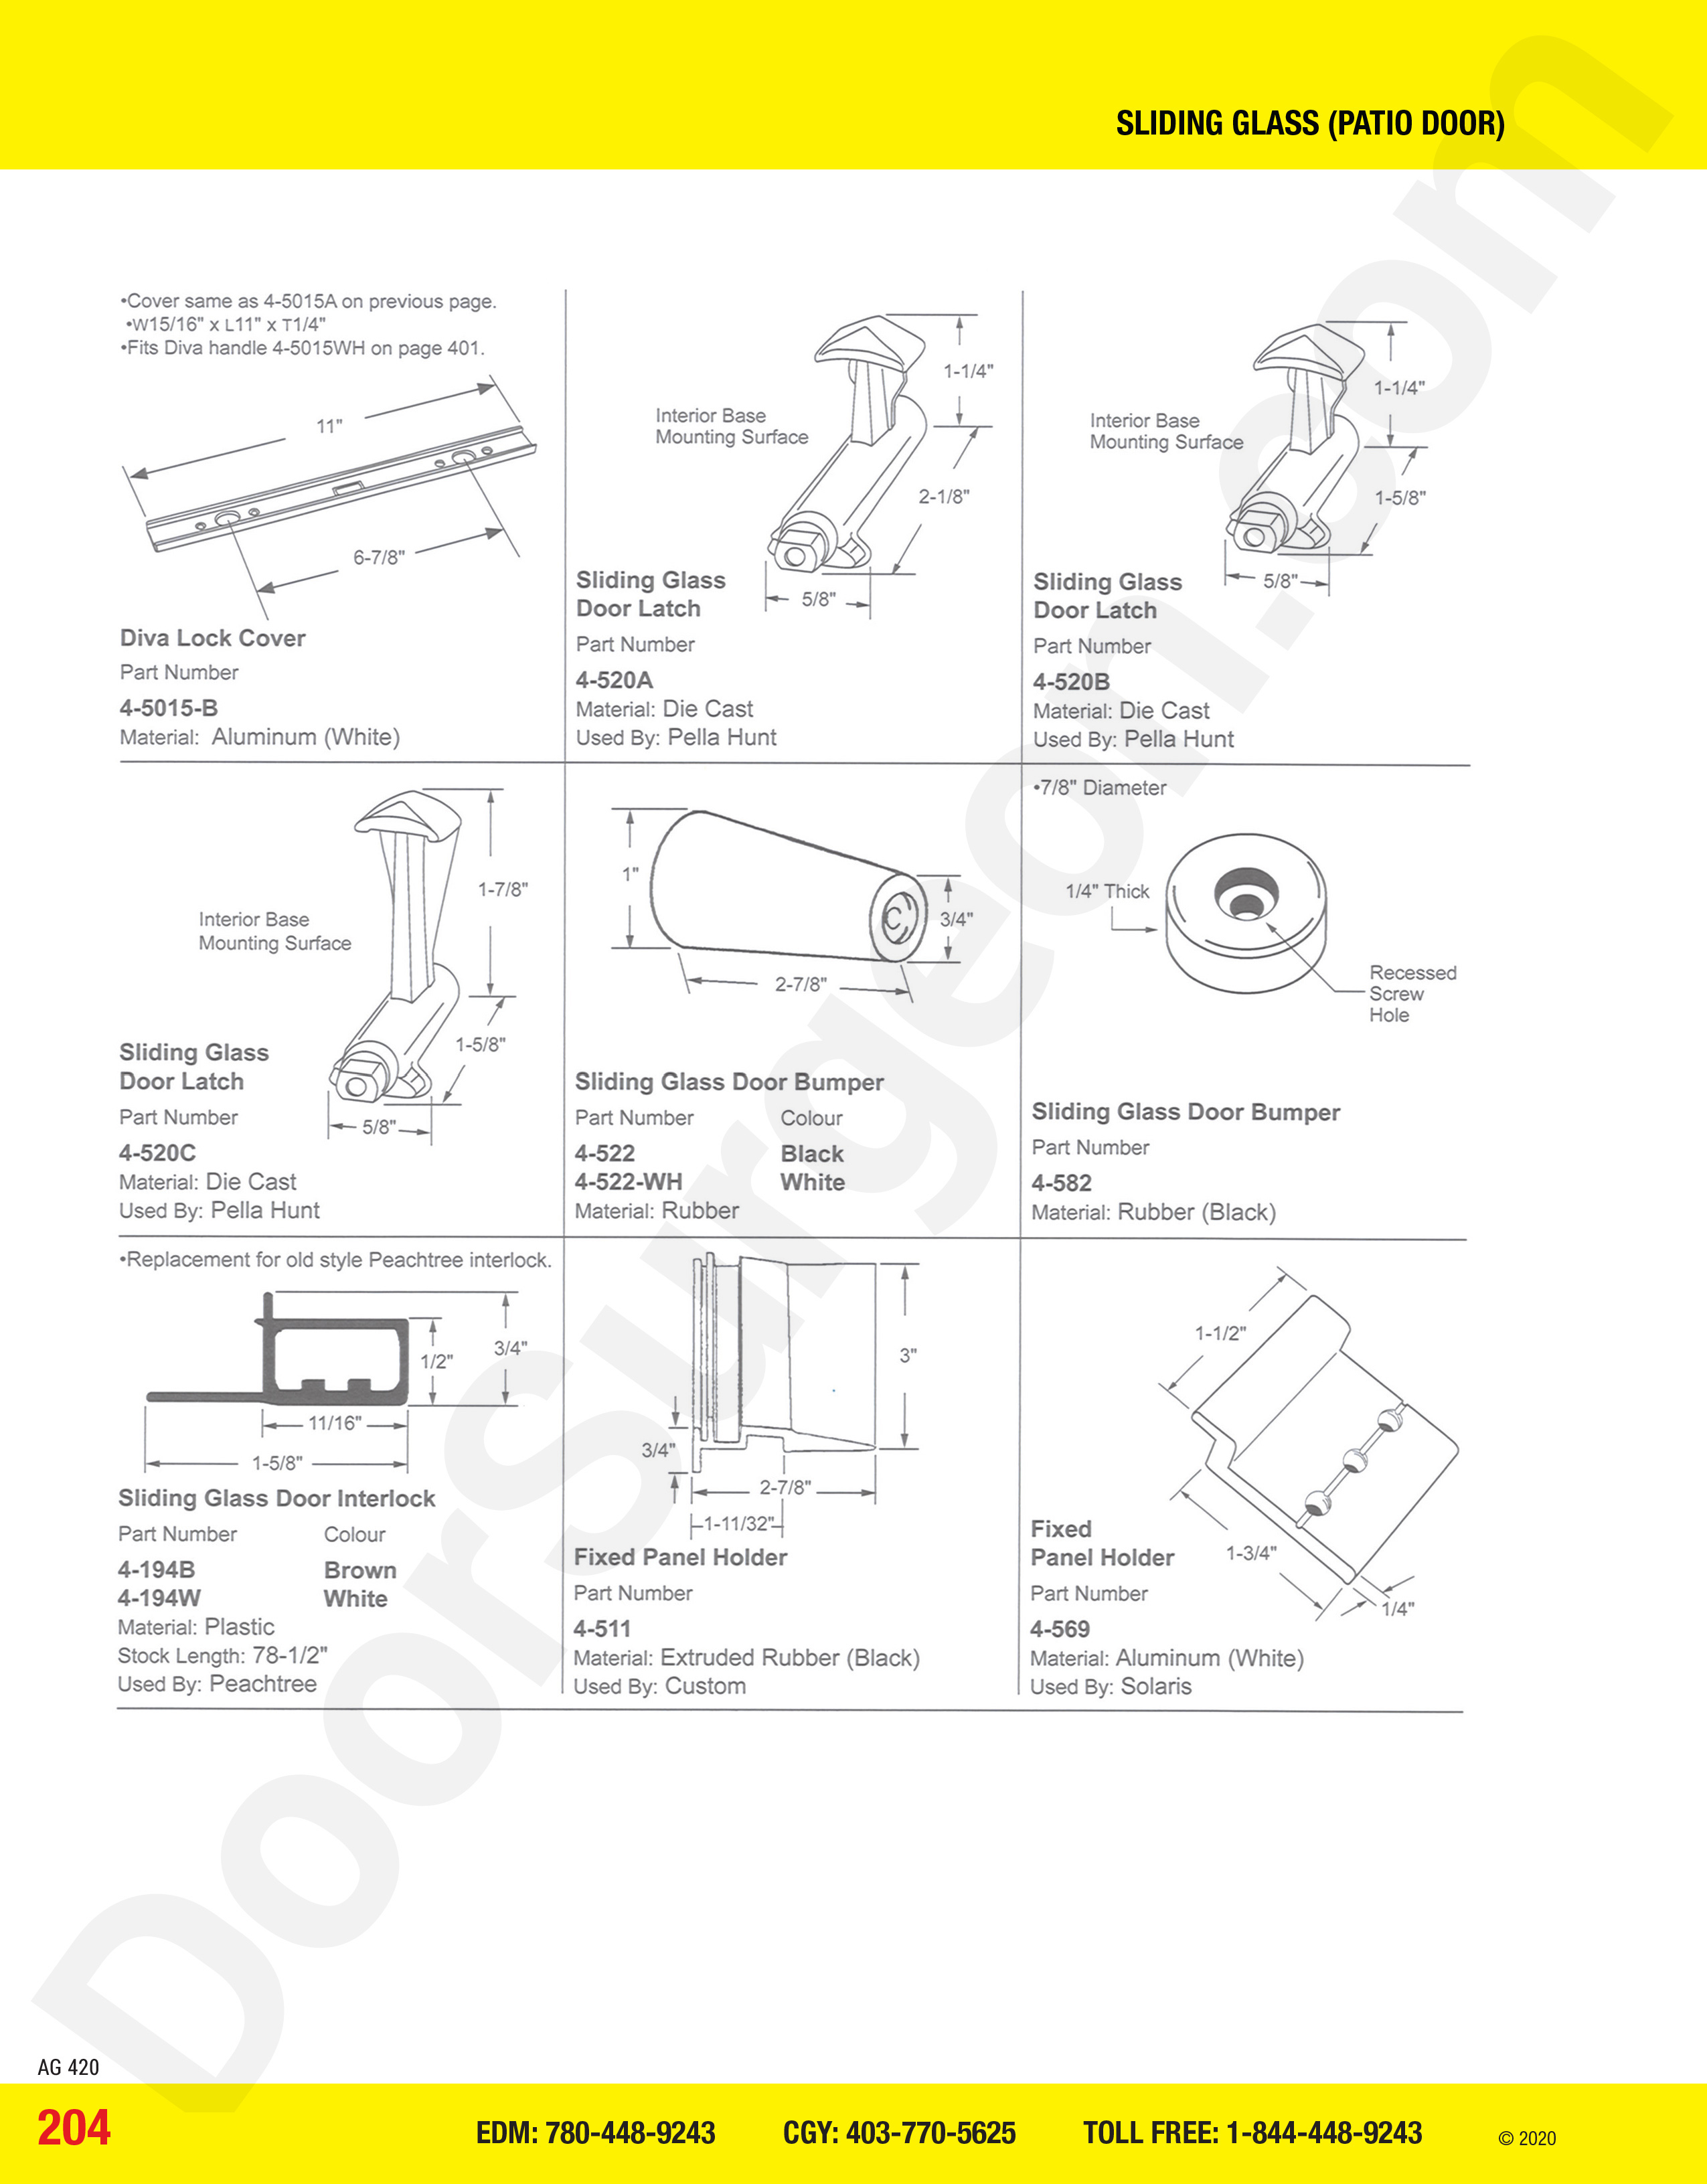 Sliding Glass and Patio Door latches, bumpers, interlocks and holders